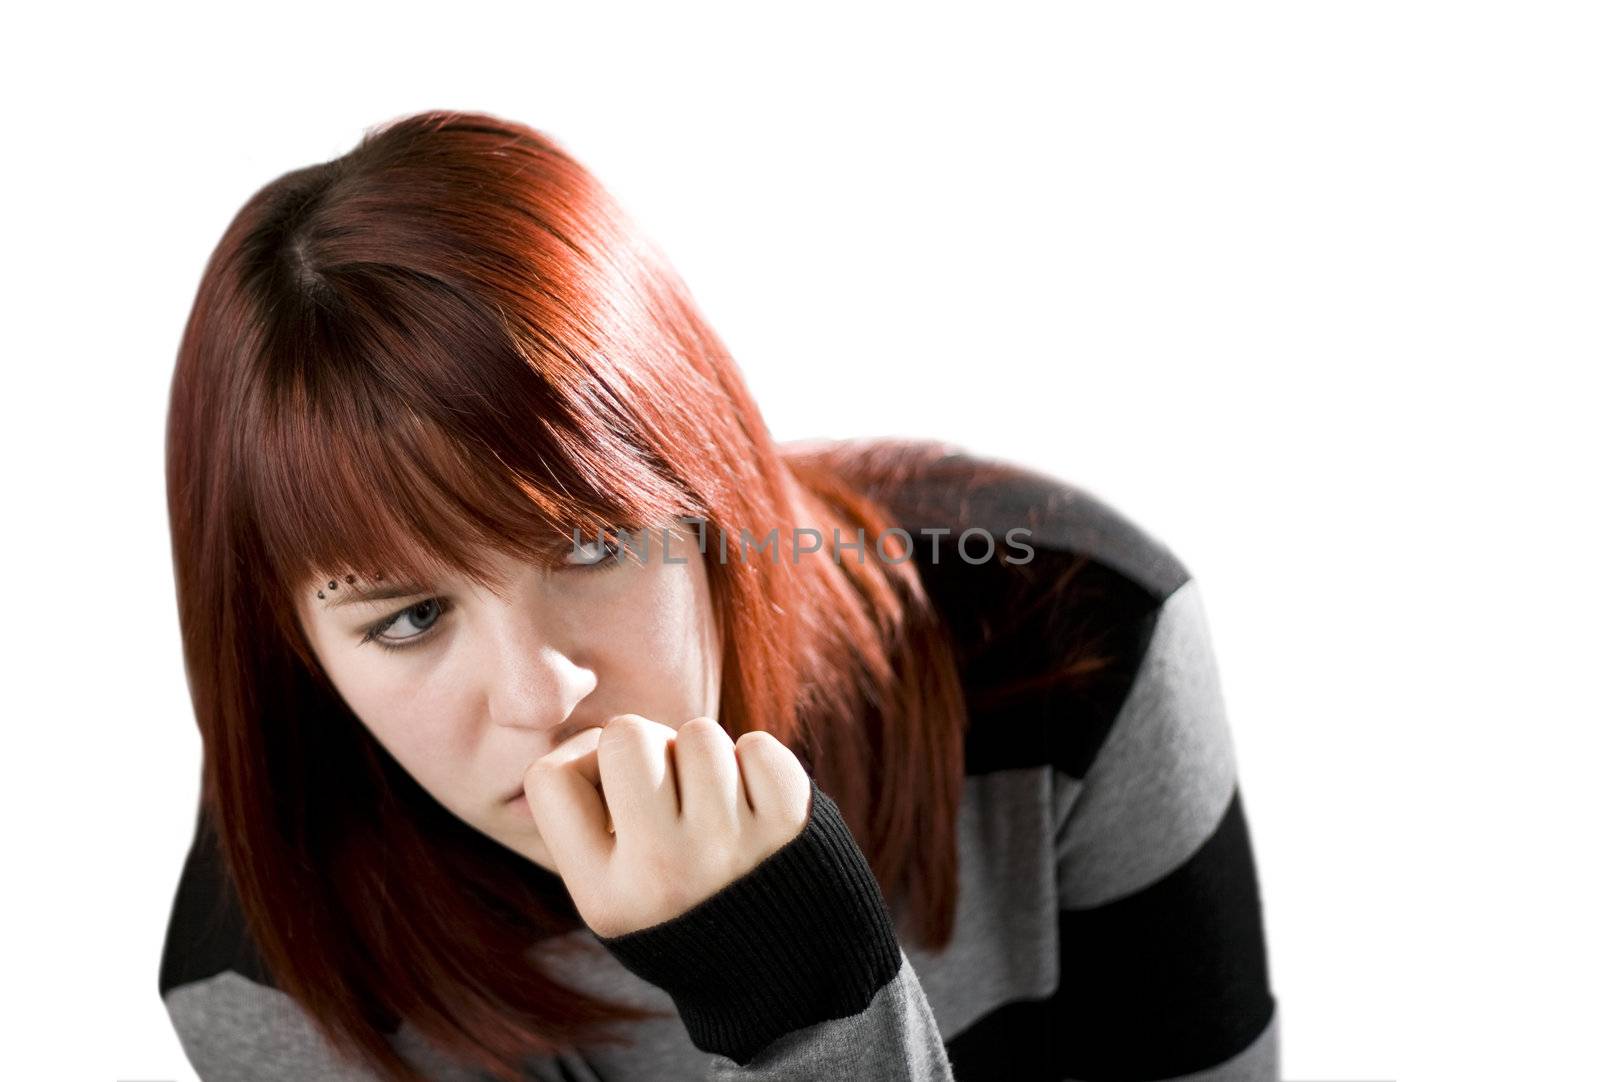 Pensive redhead girl biting her nails and checking out (looking away).

Studio shot.